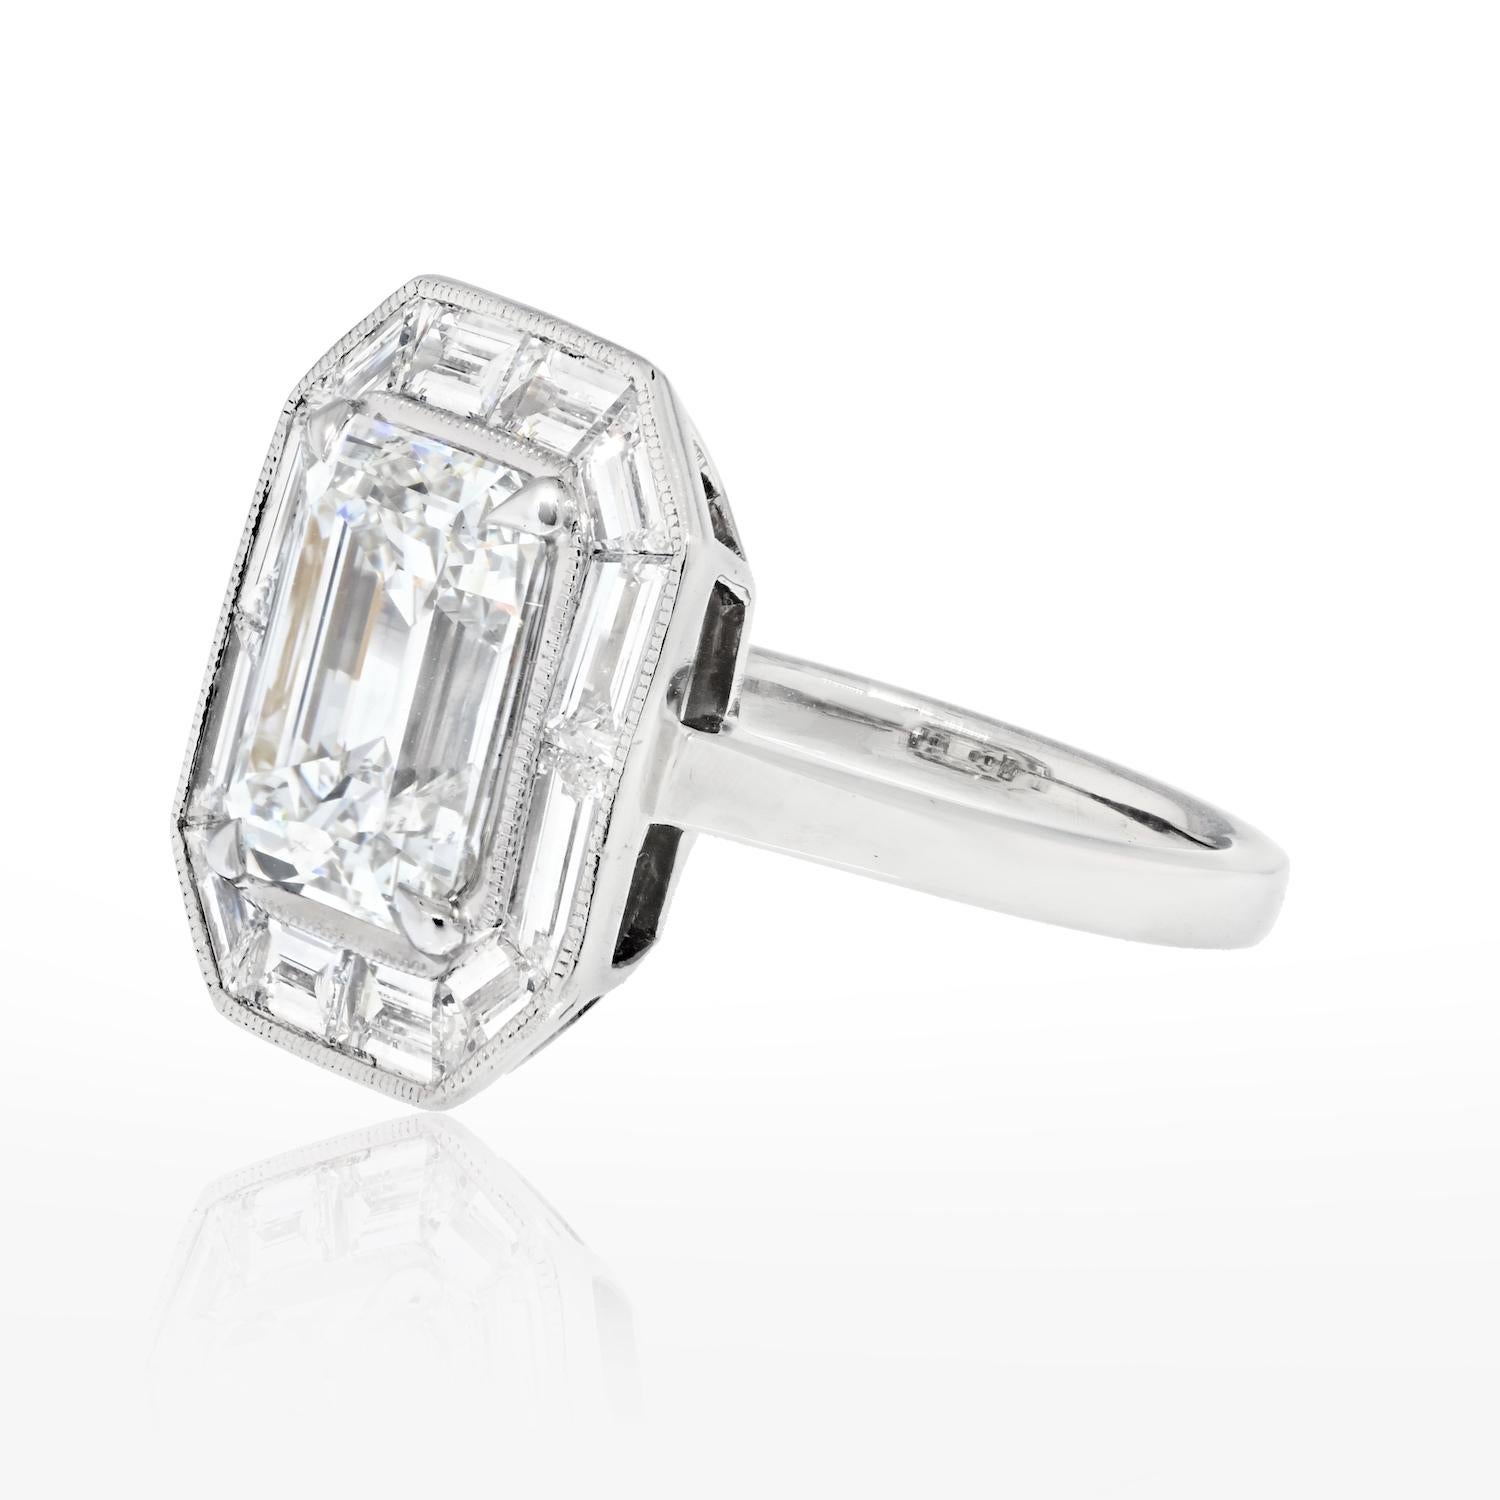 4 Carat Emerald Cut Diamond Engagement Ring.

This is a stunning diamond engagement ring crafted in platinum and mounted with a stunning GIA-certified Emerald Cut Diamond. 
We promise you if you are in love with Art Deco, architecture, and clean